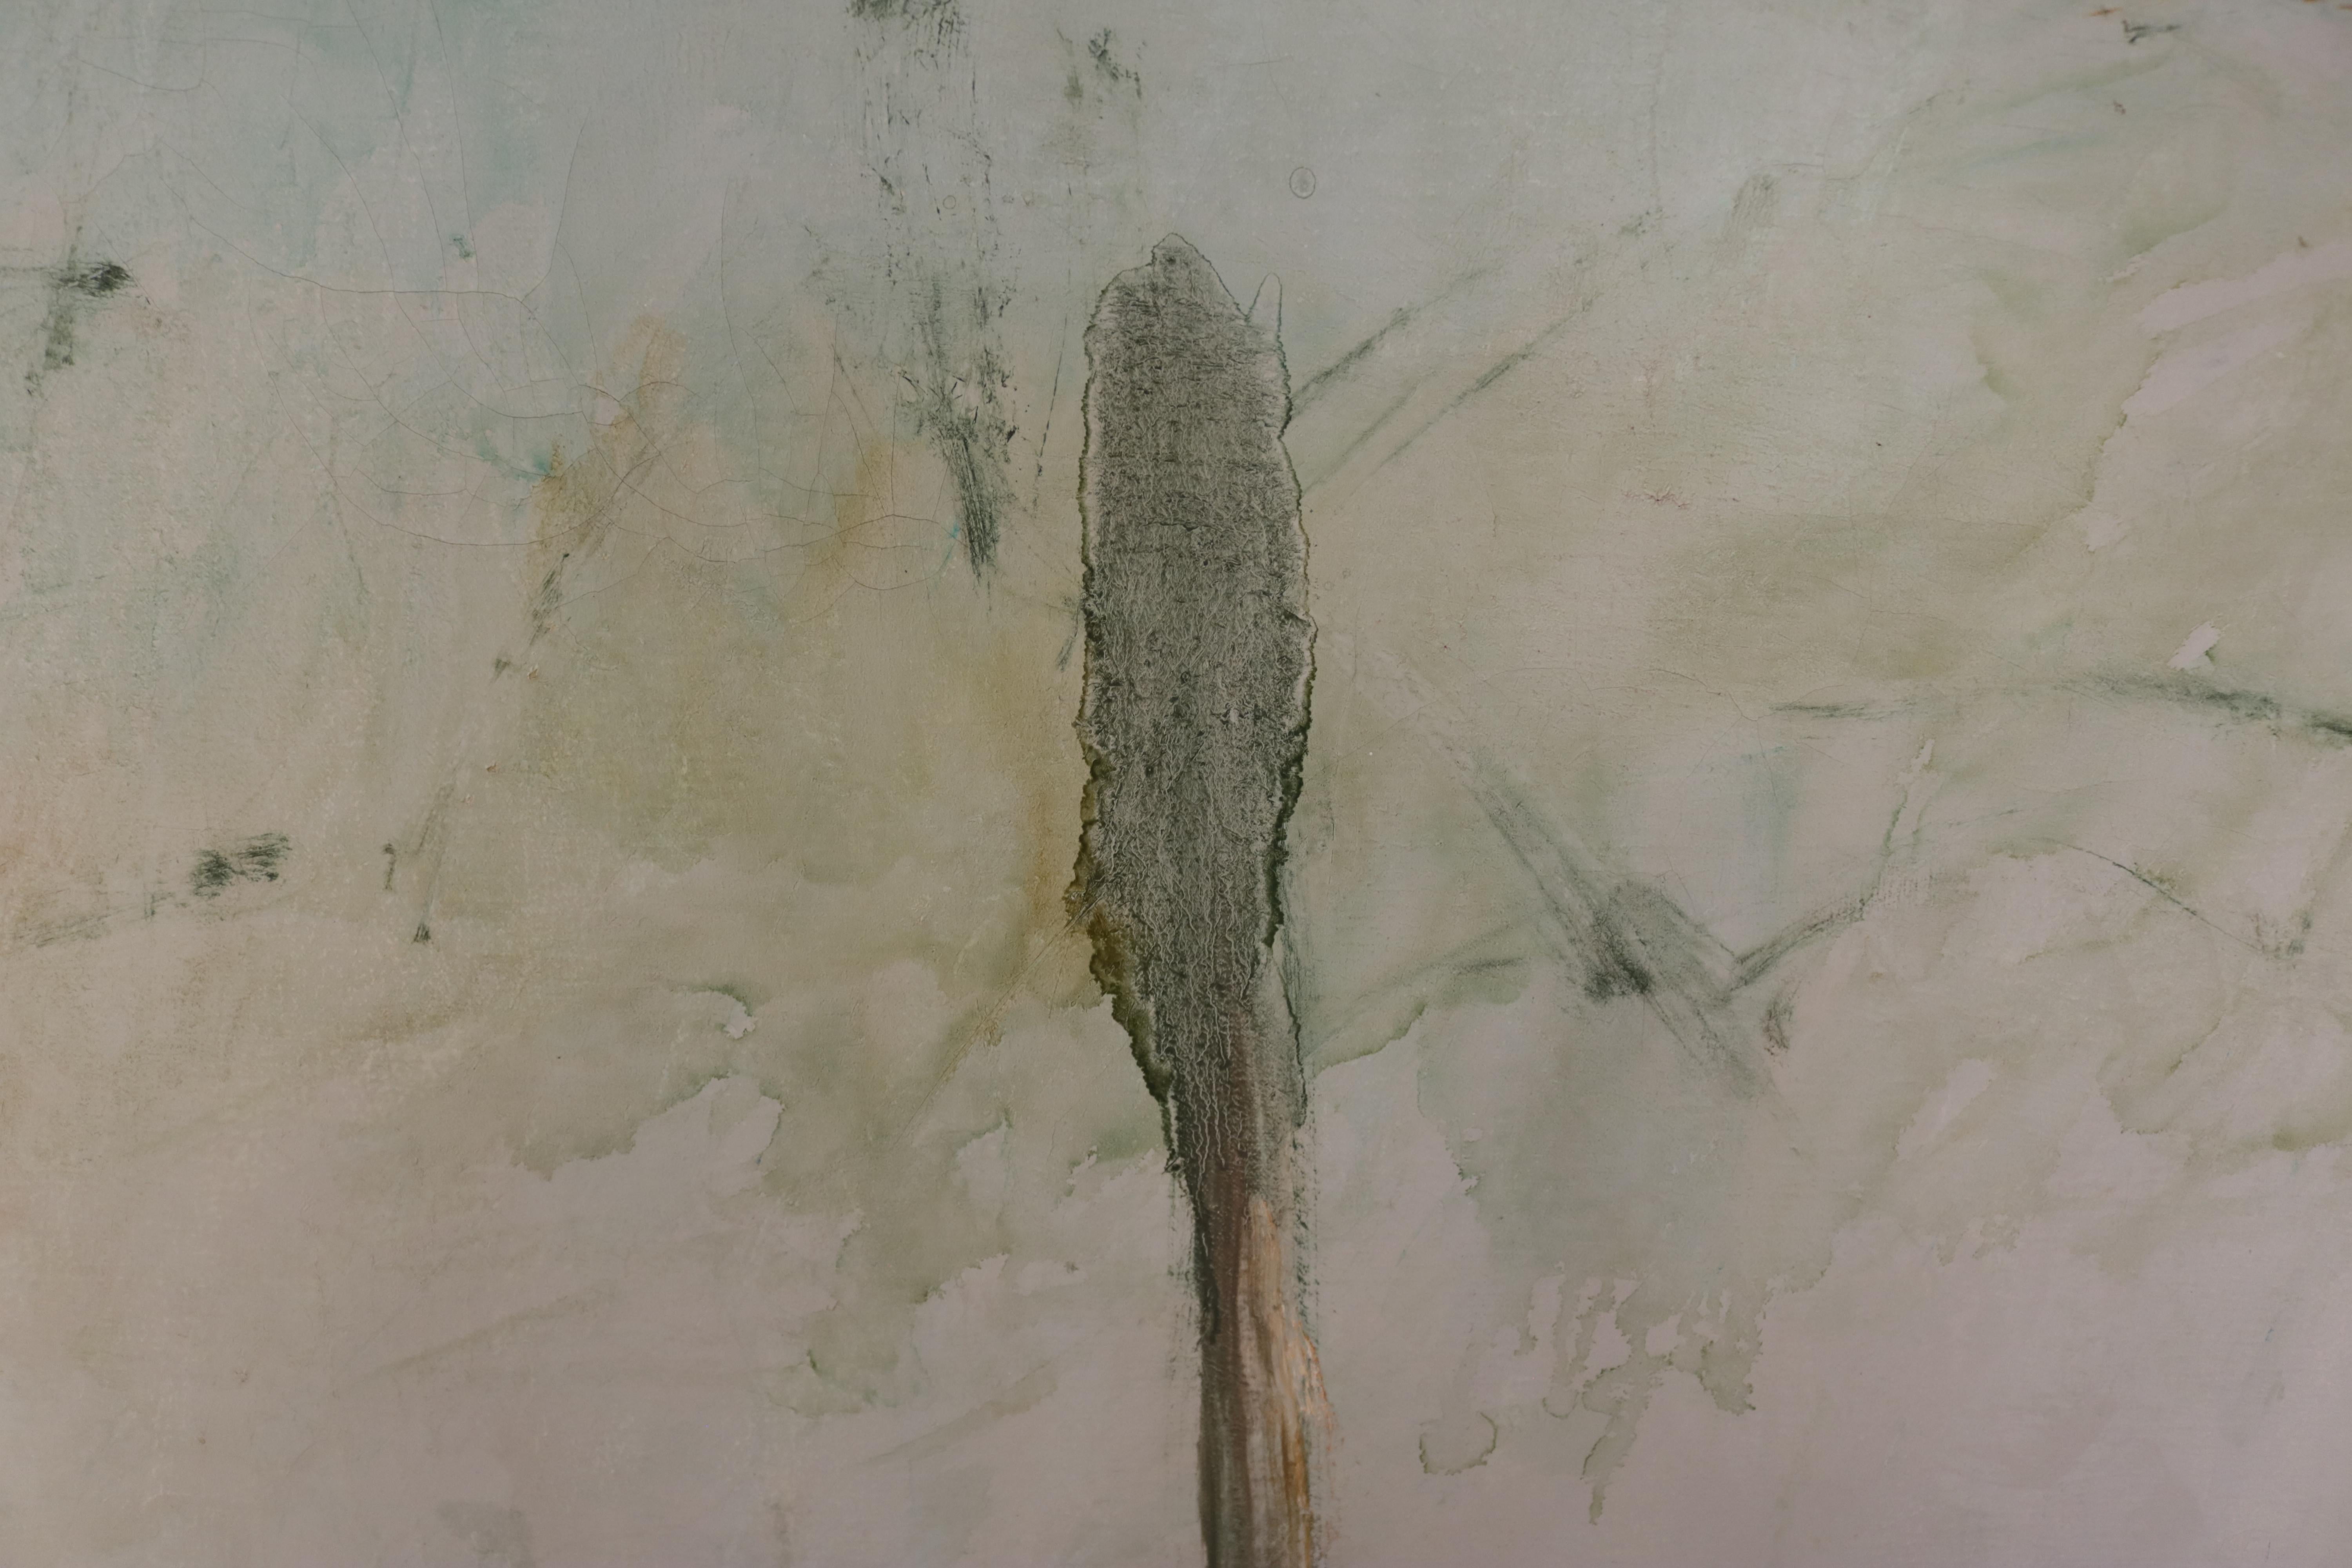 Minimalist painting by Dorothy Kleinberg.
Signed with her initial letters and dated 1966.